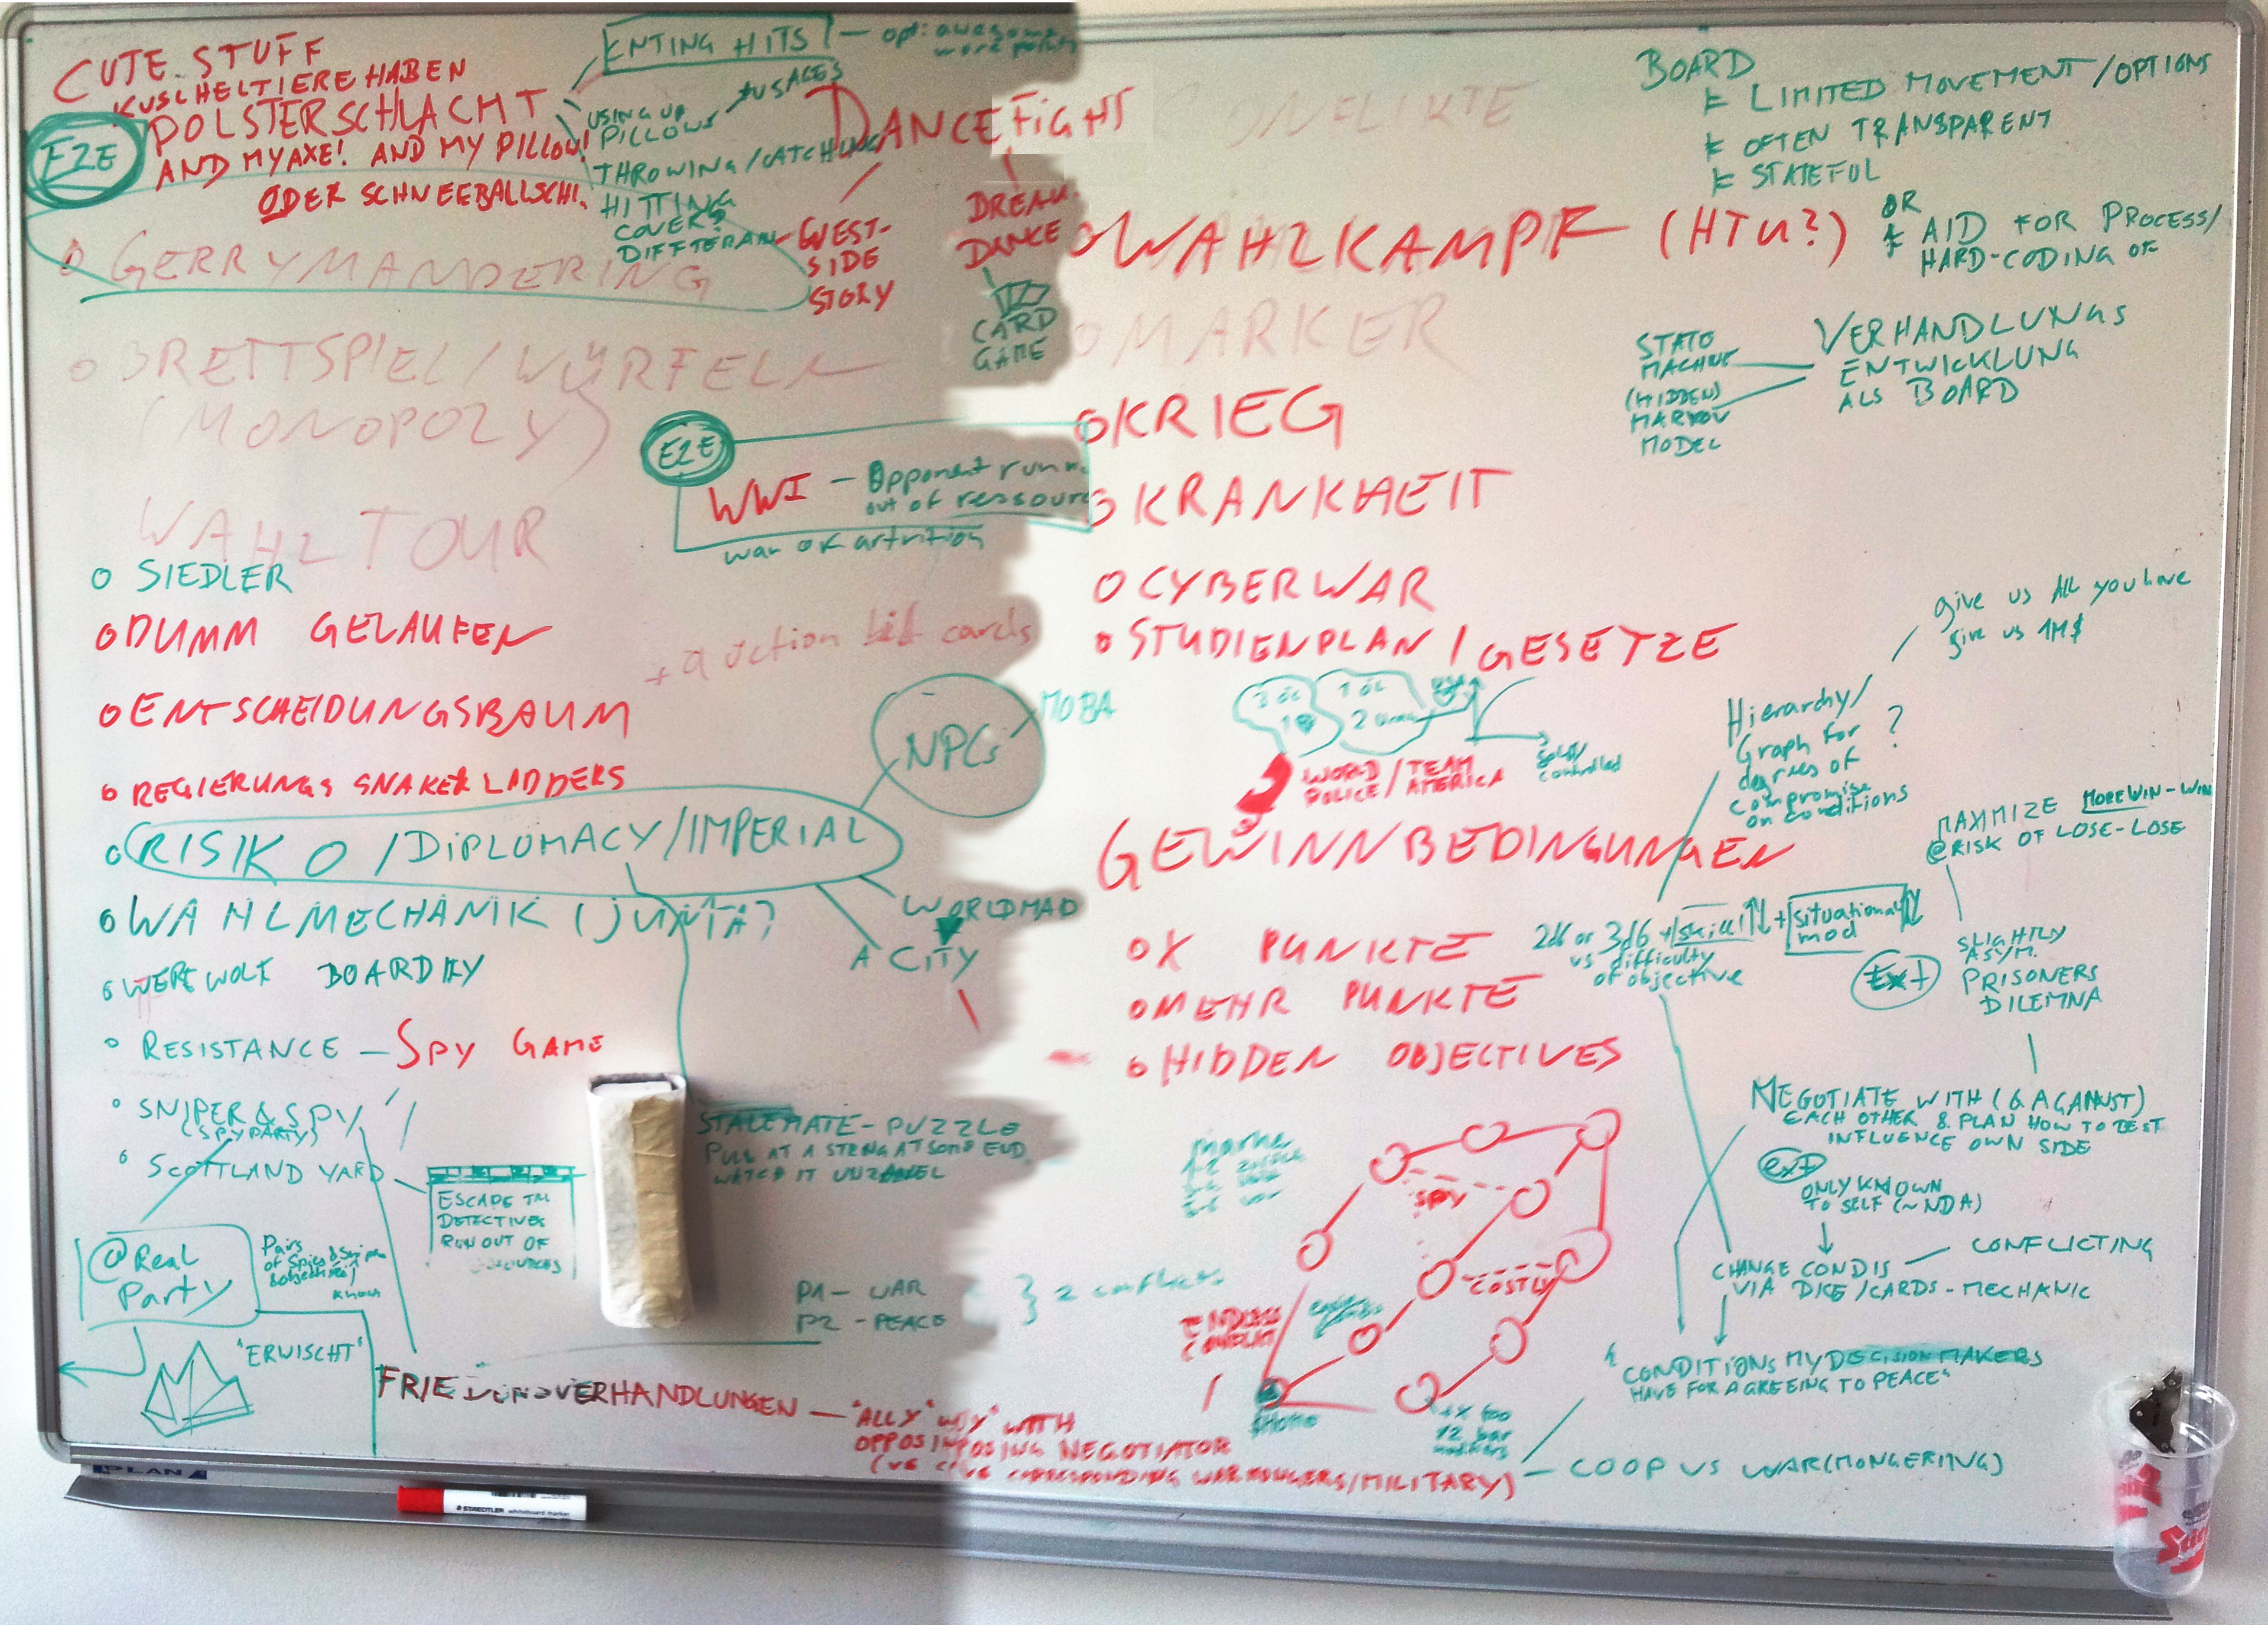 Photo of whiteboard during initial brainstorming